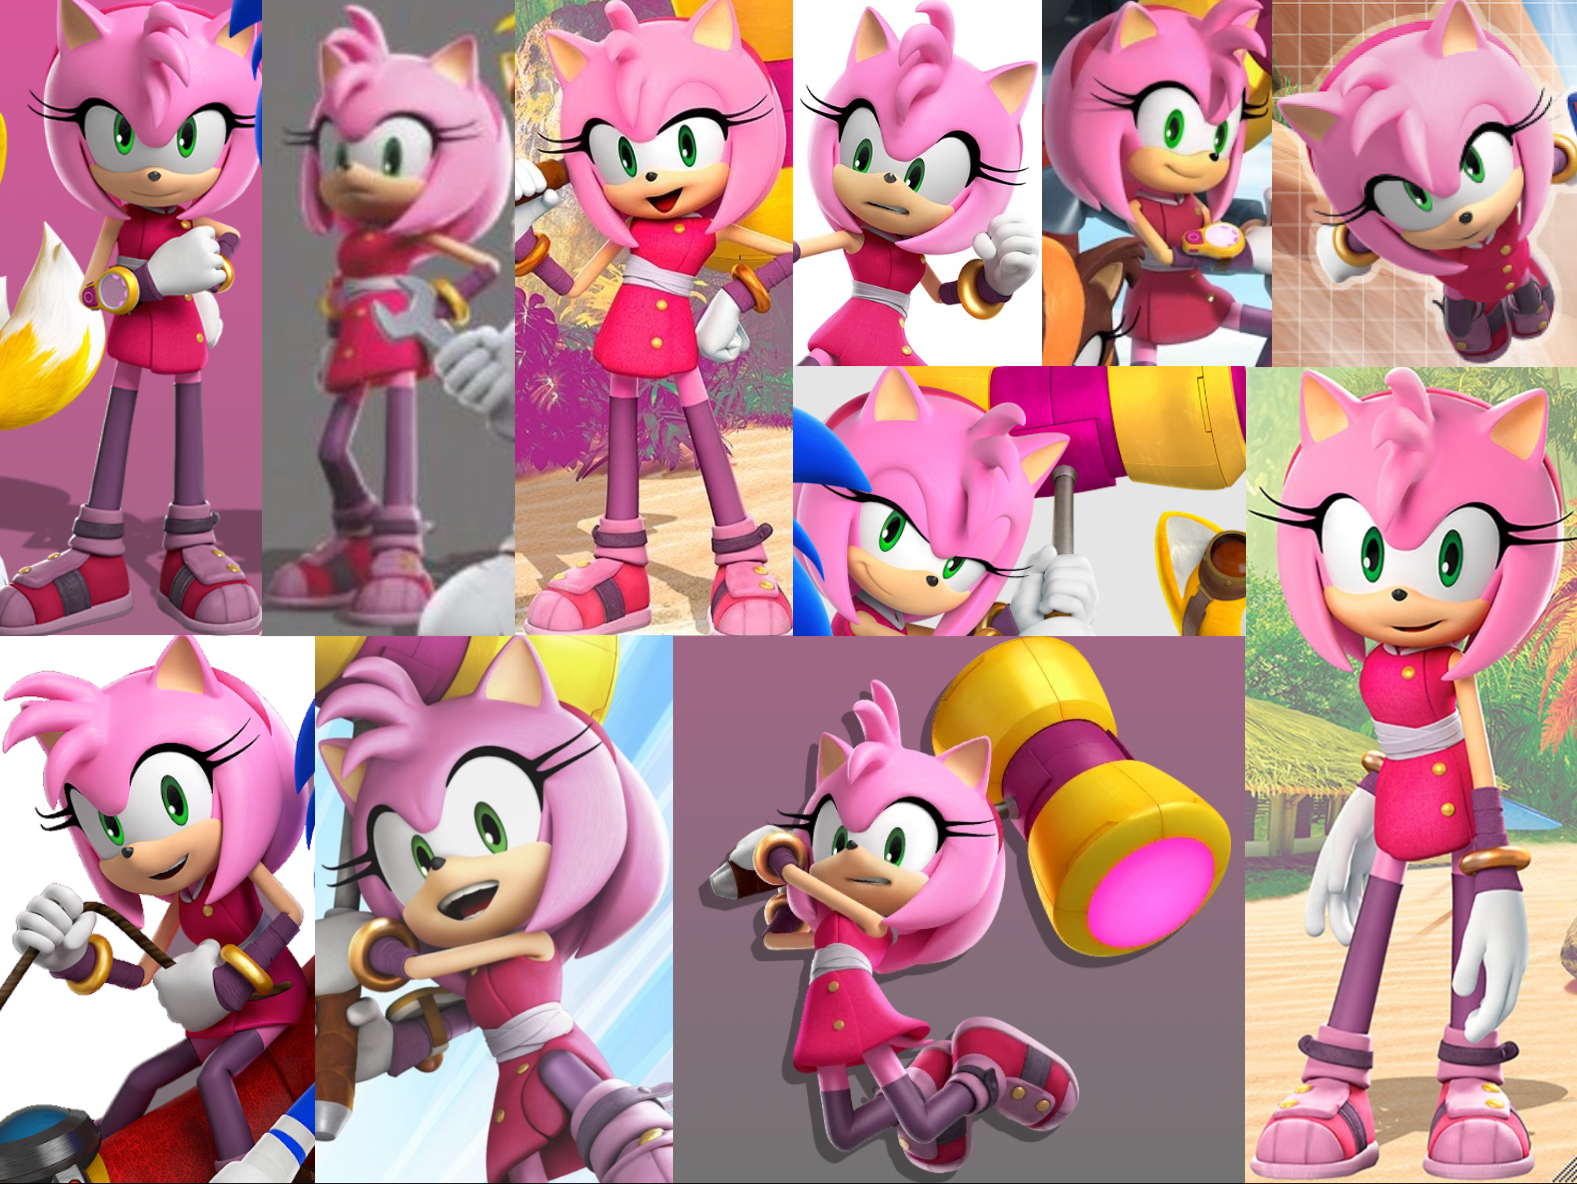 Boom Amy Rose Render Collage High Quality By Sonicboomgirl23 On